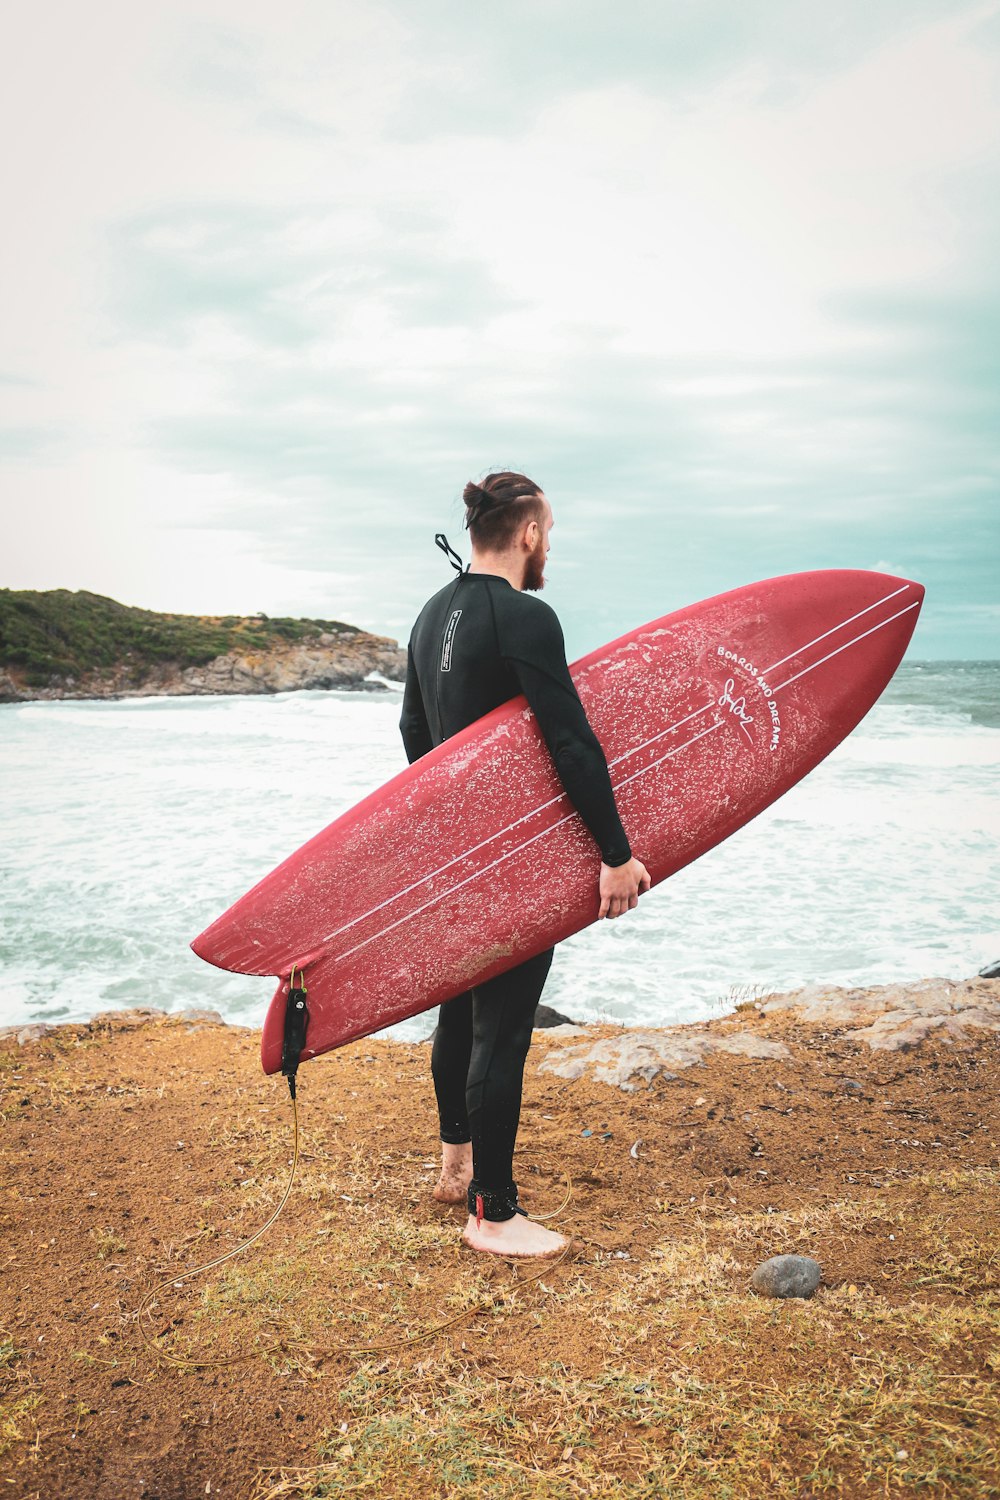 a man holding a red surfboard on top of a sandy beach